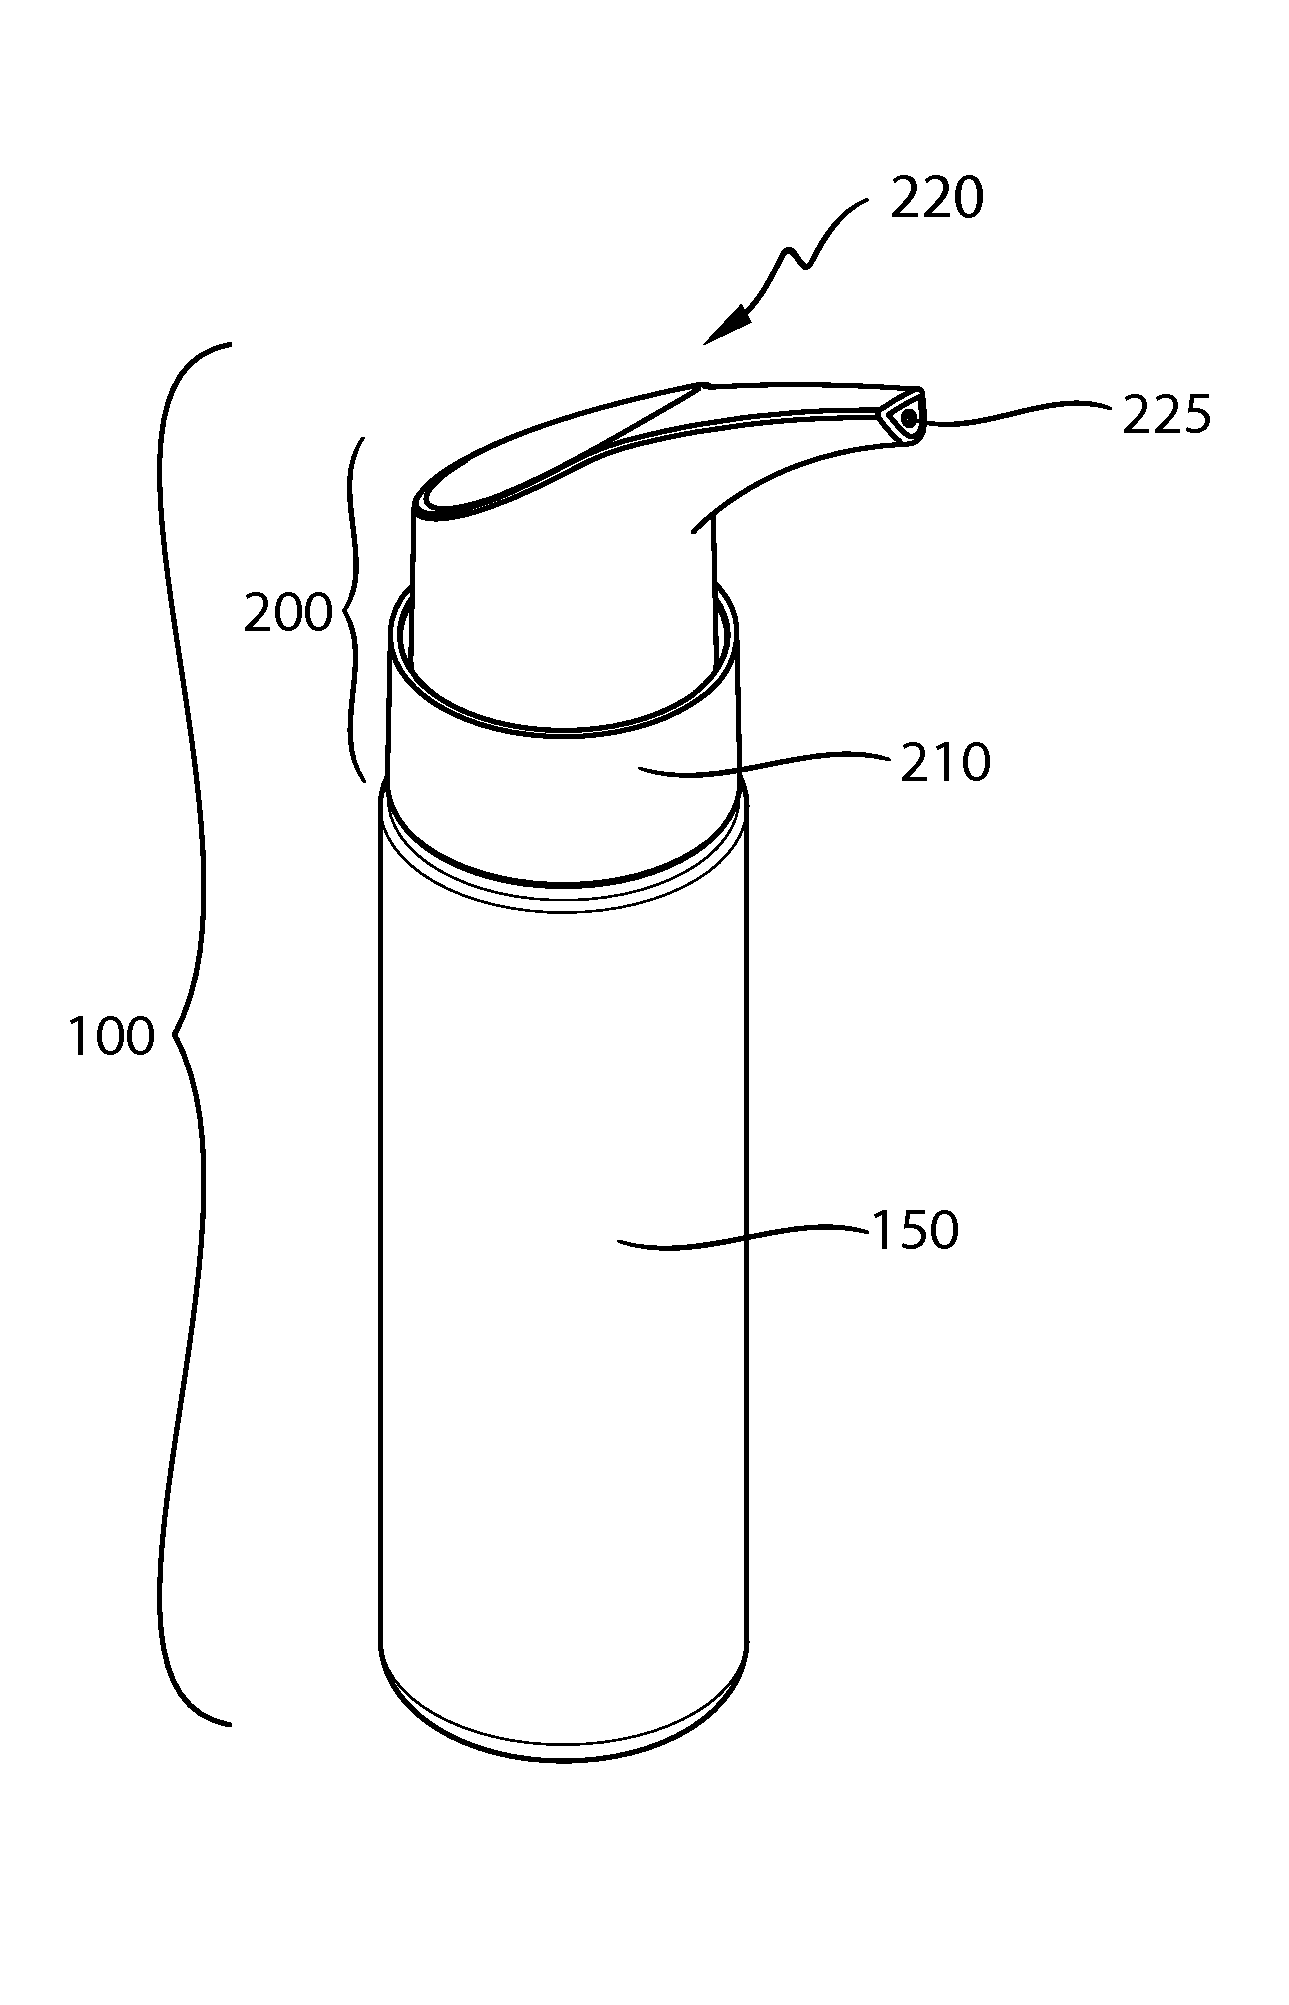 Applicator Assembly for Applying a Composition